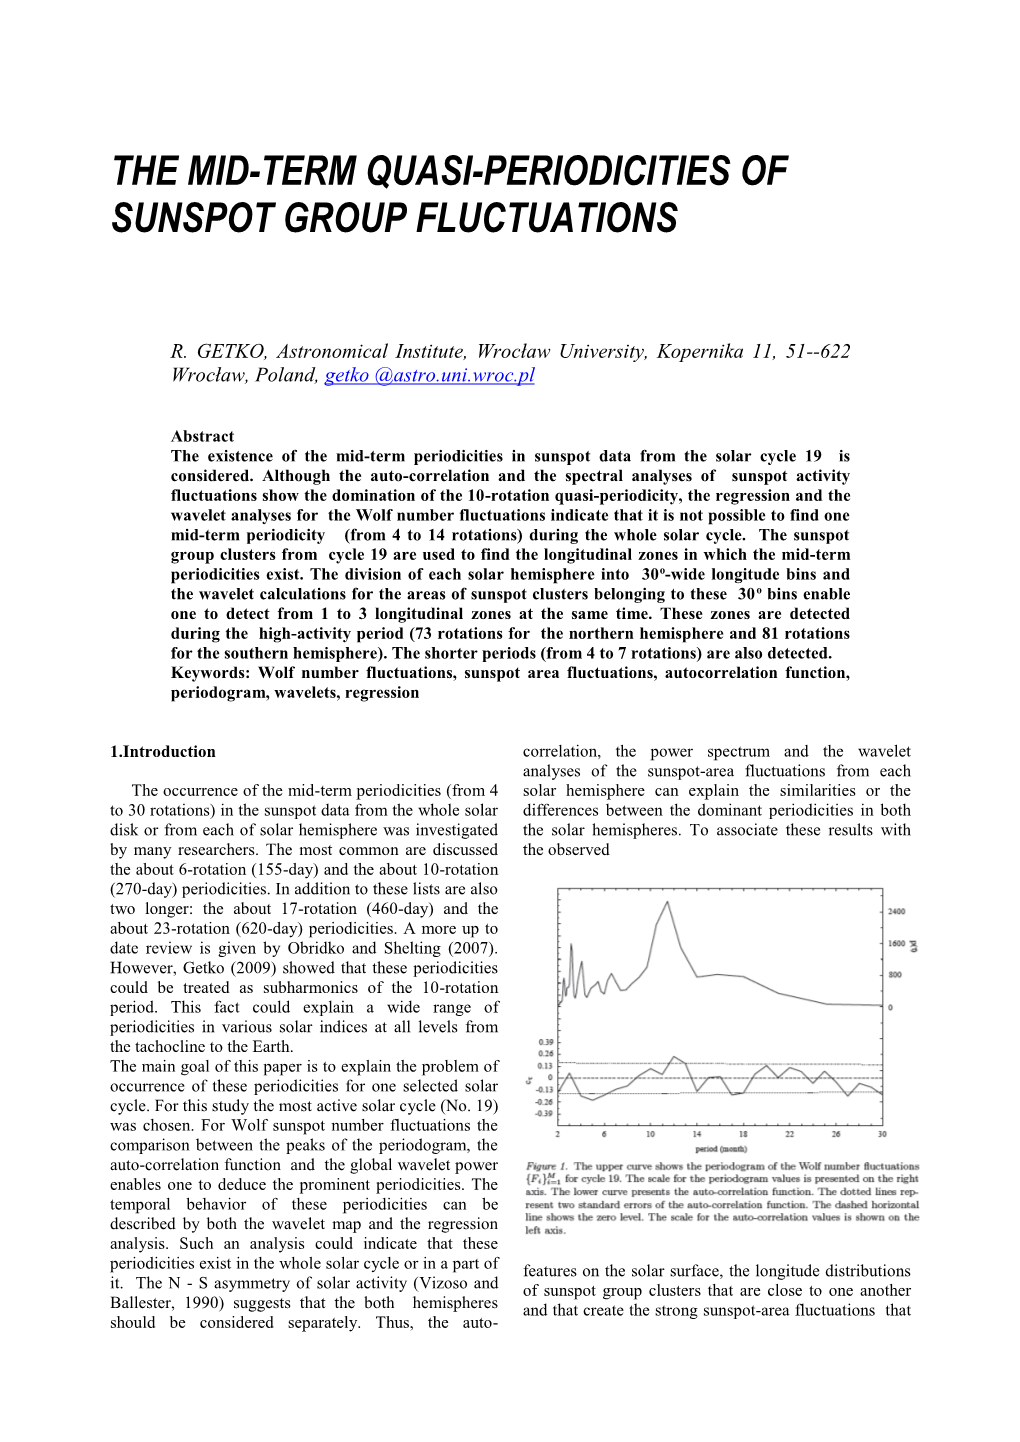 The Mid-Term Quasi-Periodicities of Sunspot Group Fluctuations